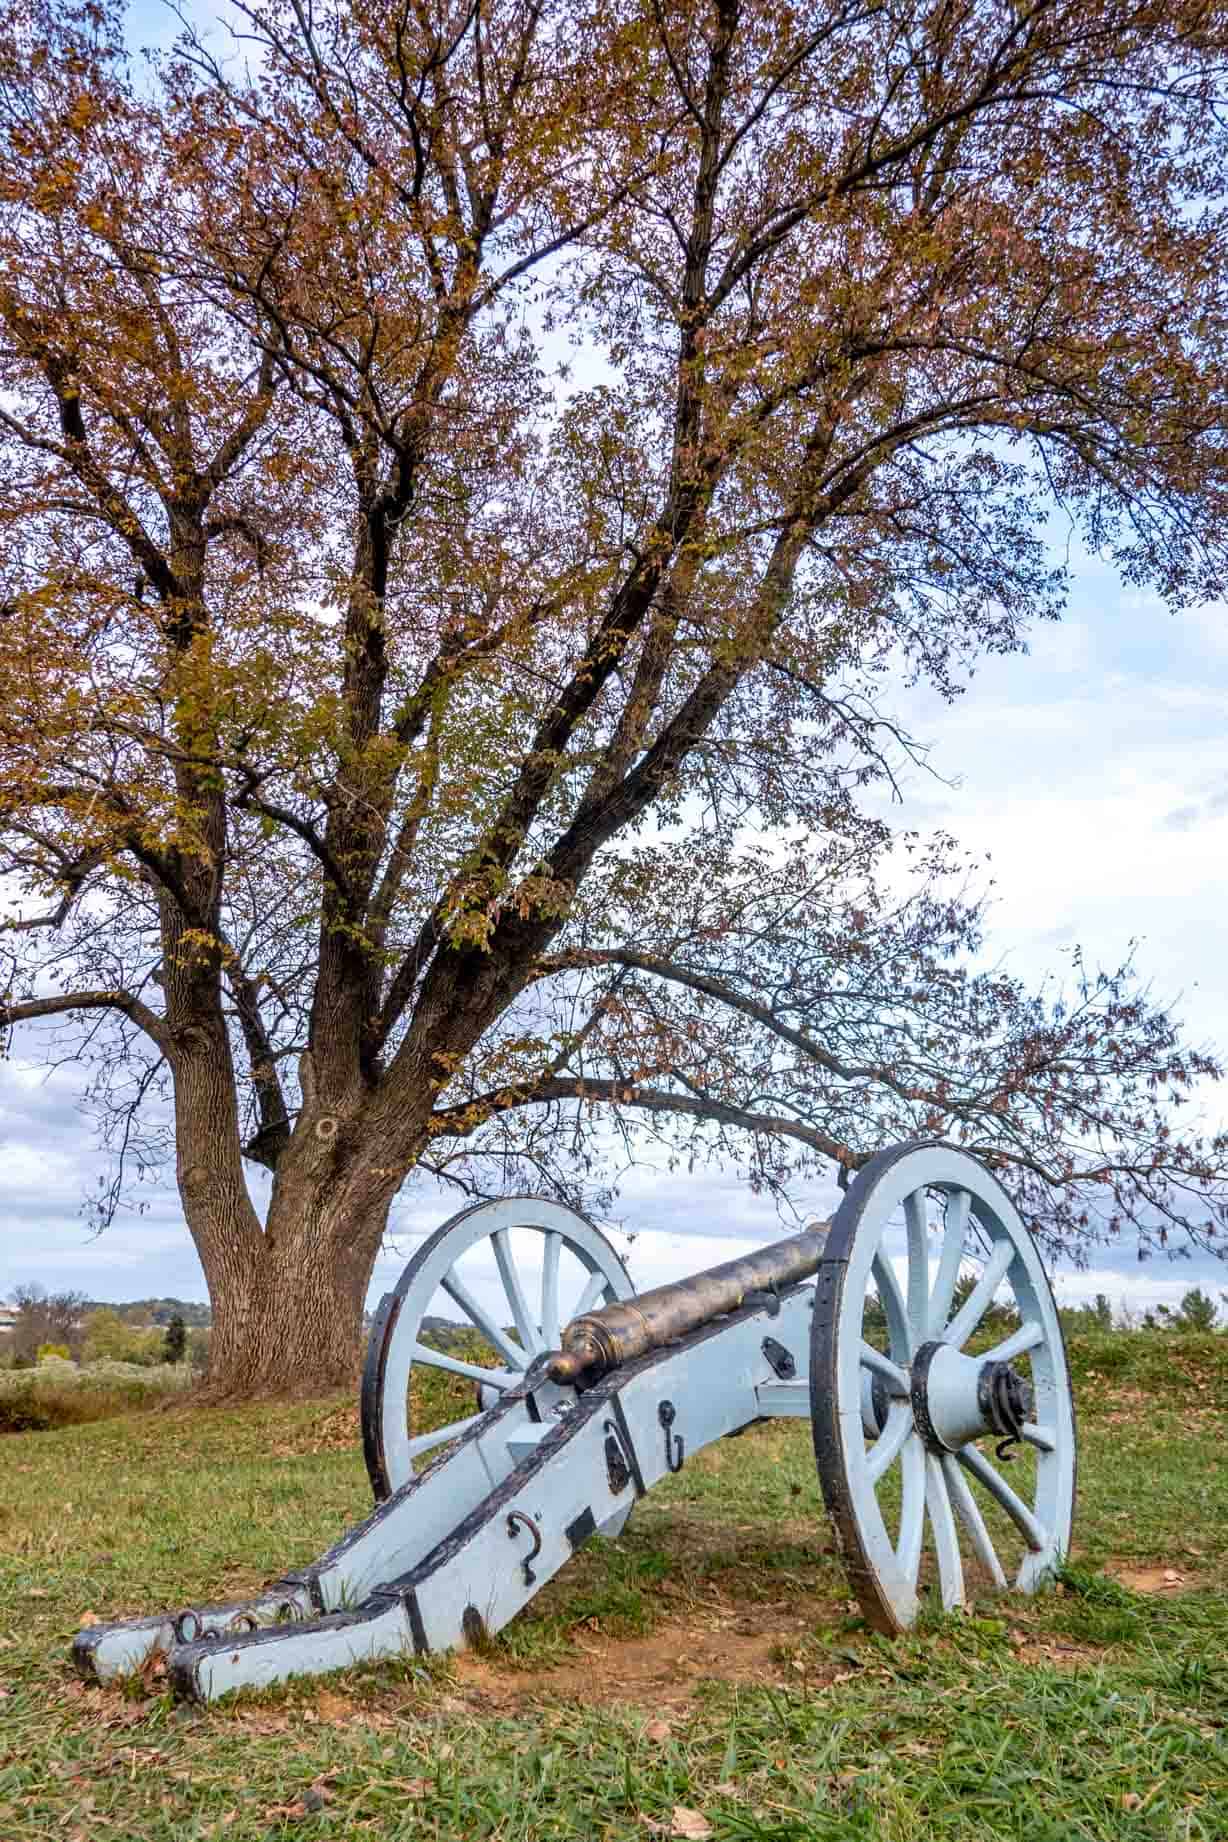 A wheeled cannon in Valley Forge